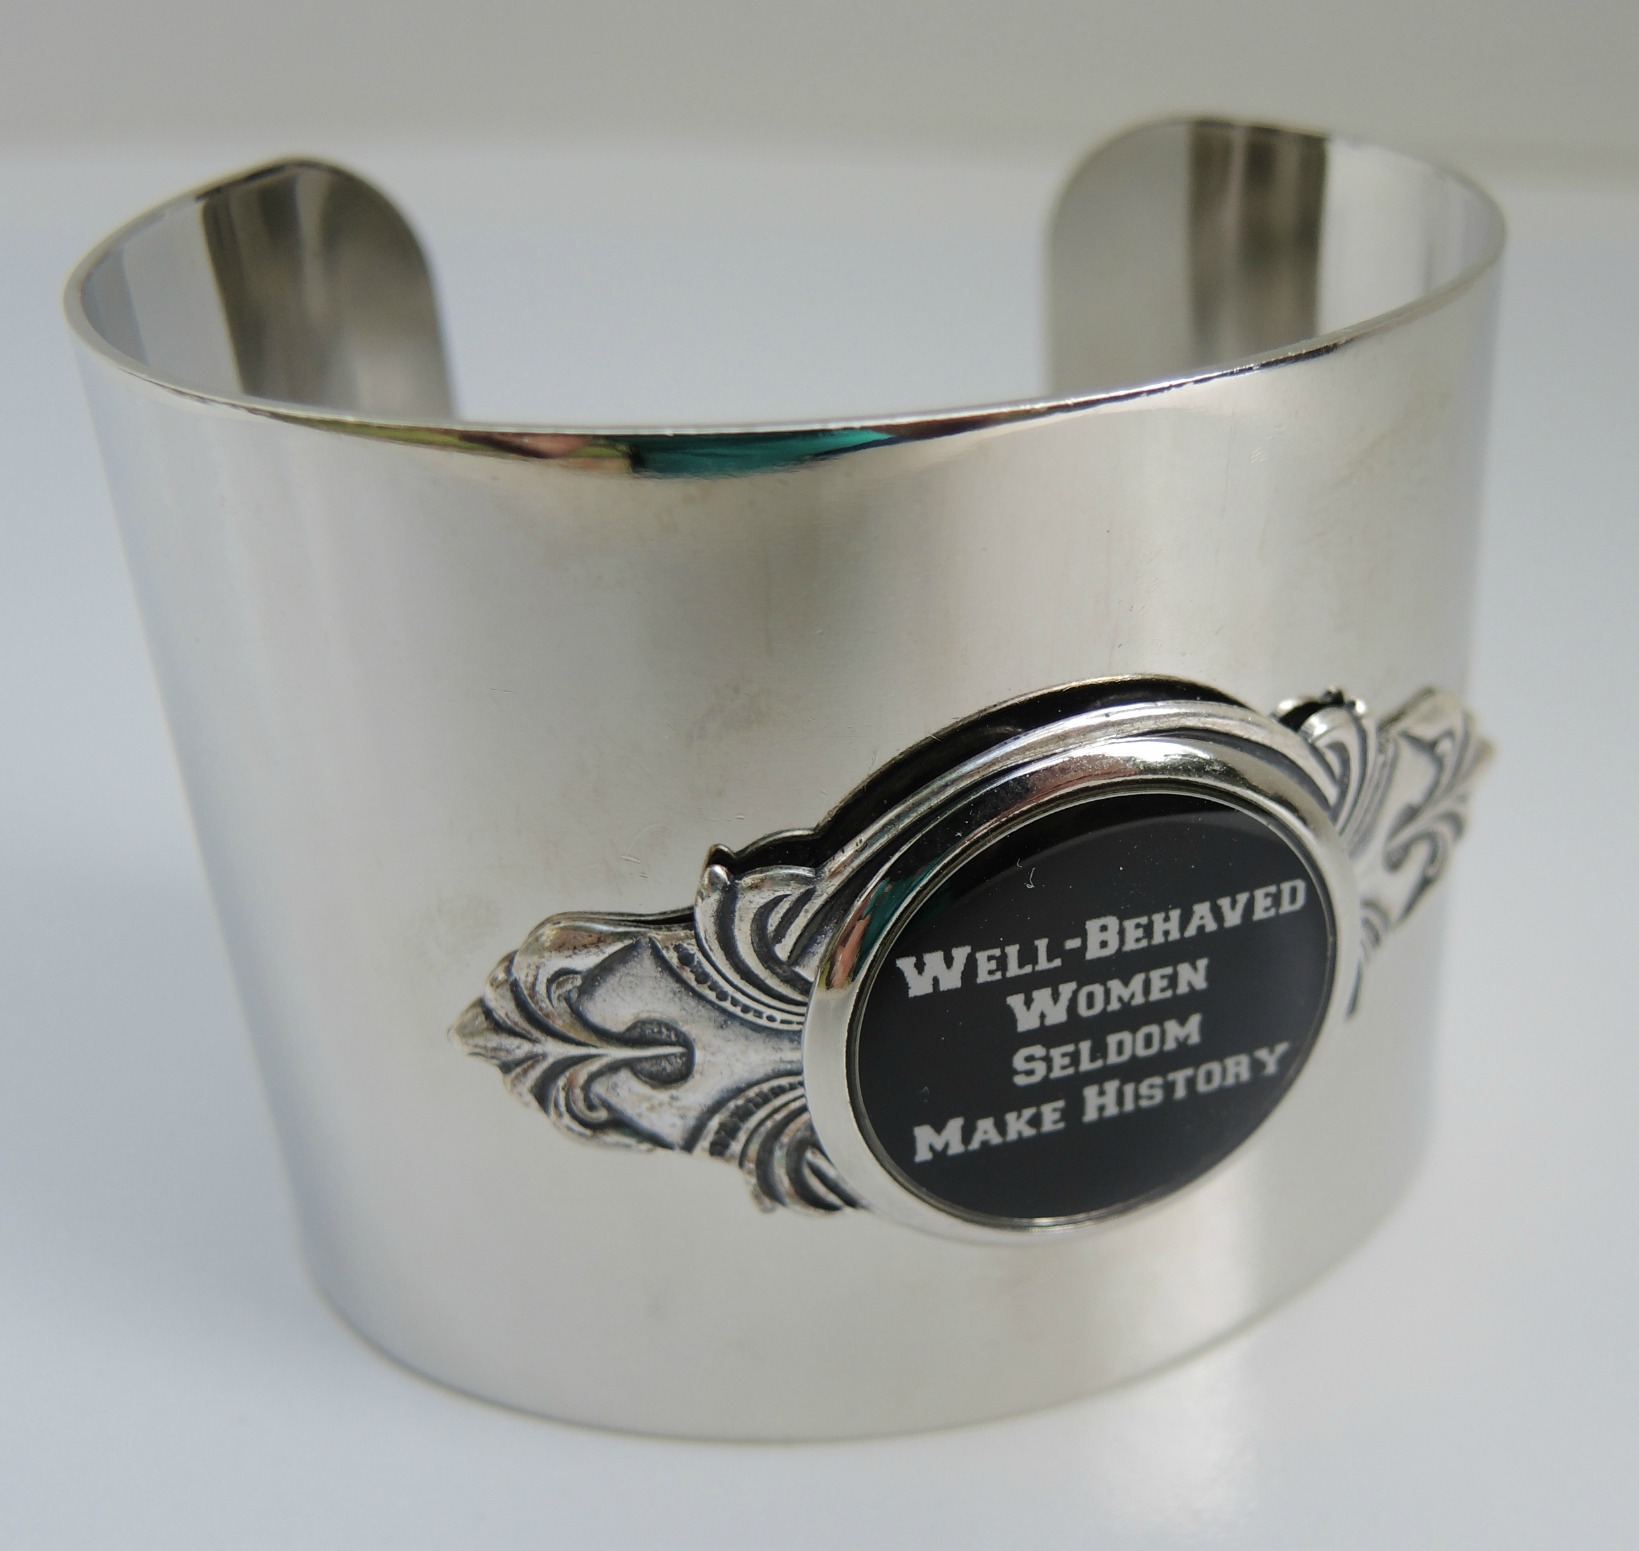 Cuff Bracelet with Quote "Well-behaved women".